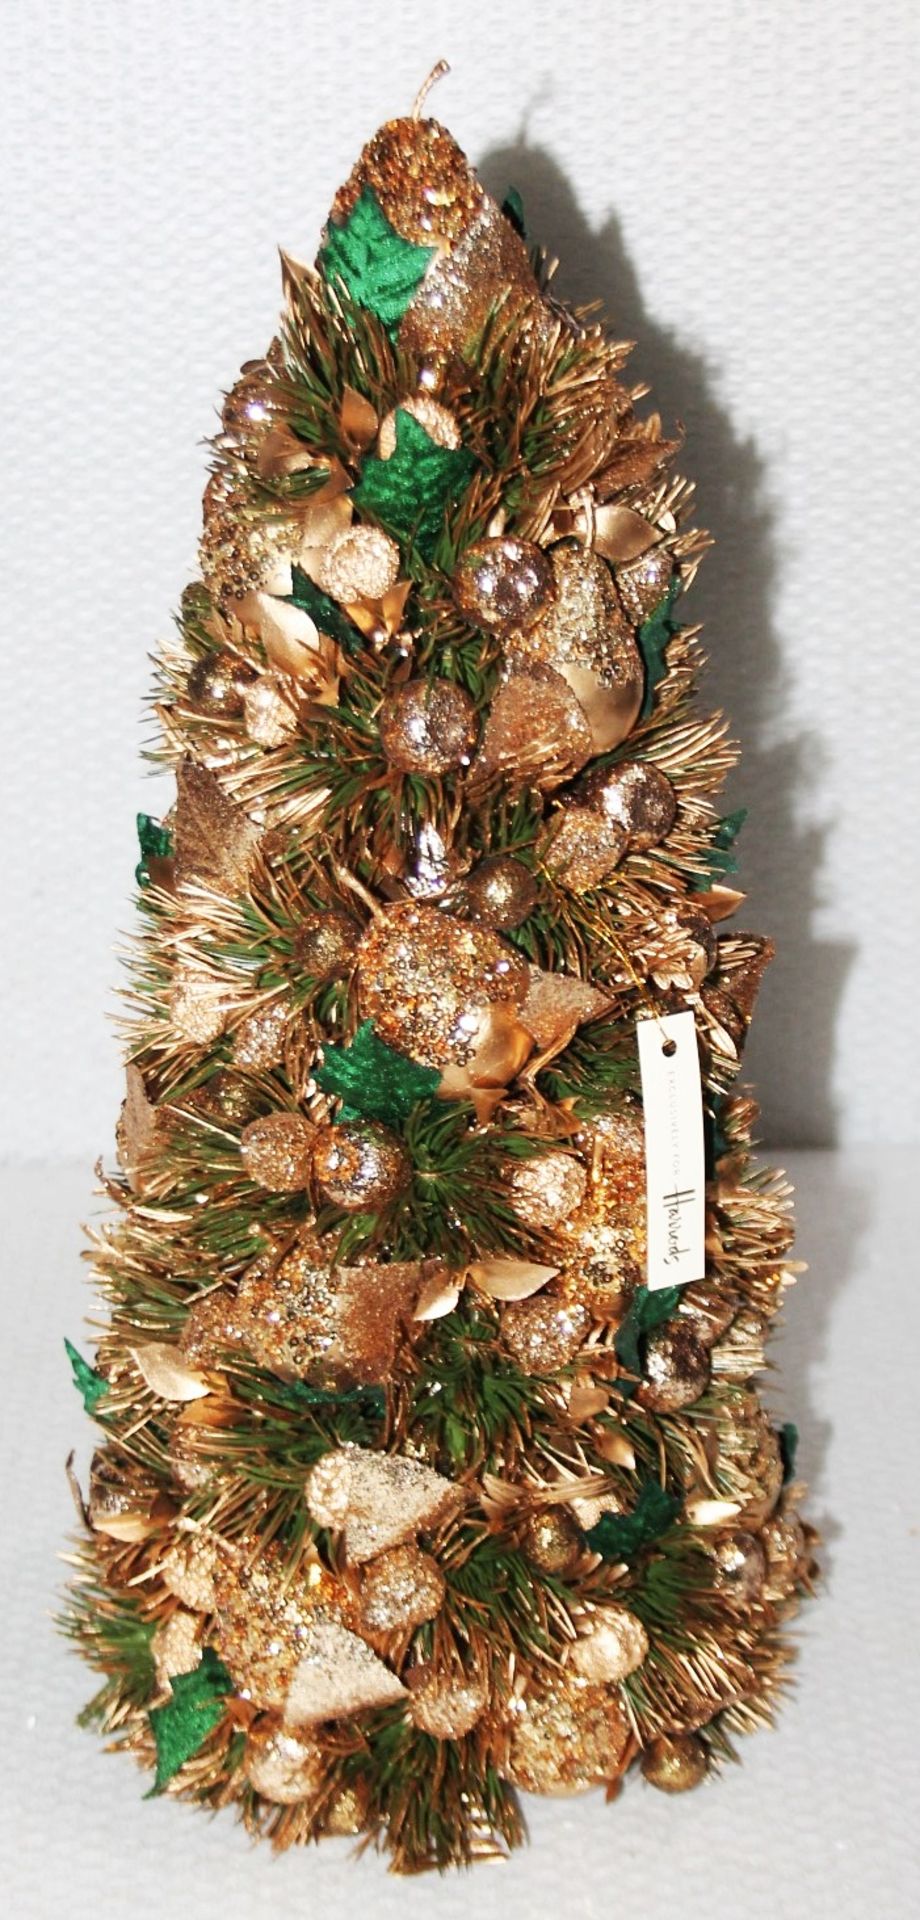 1 x SALZBURG CREATIONS Decorative 'Pear Tree' Ornament In Gold & Green - Original Price £300.00 - Image 3 of 9